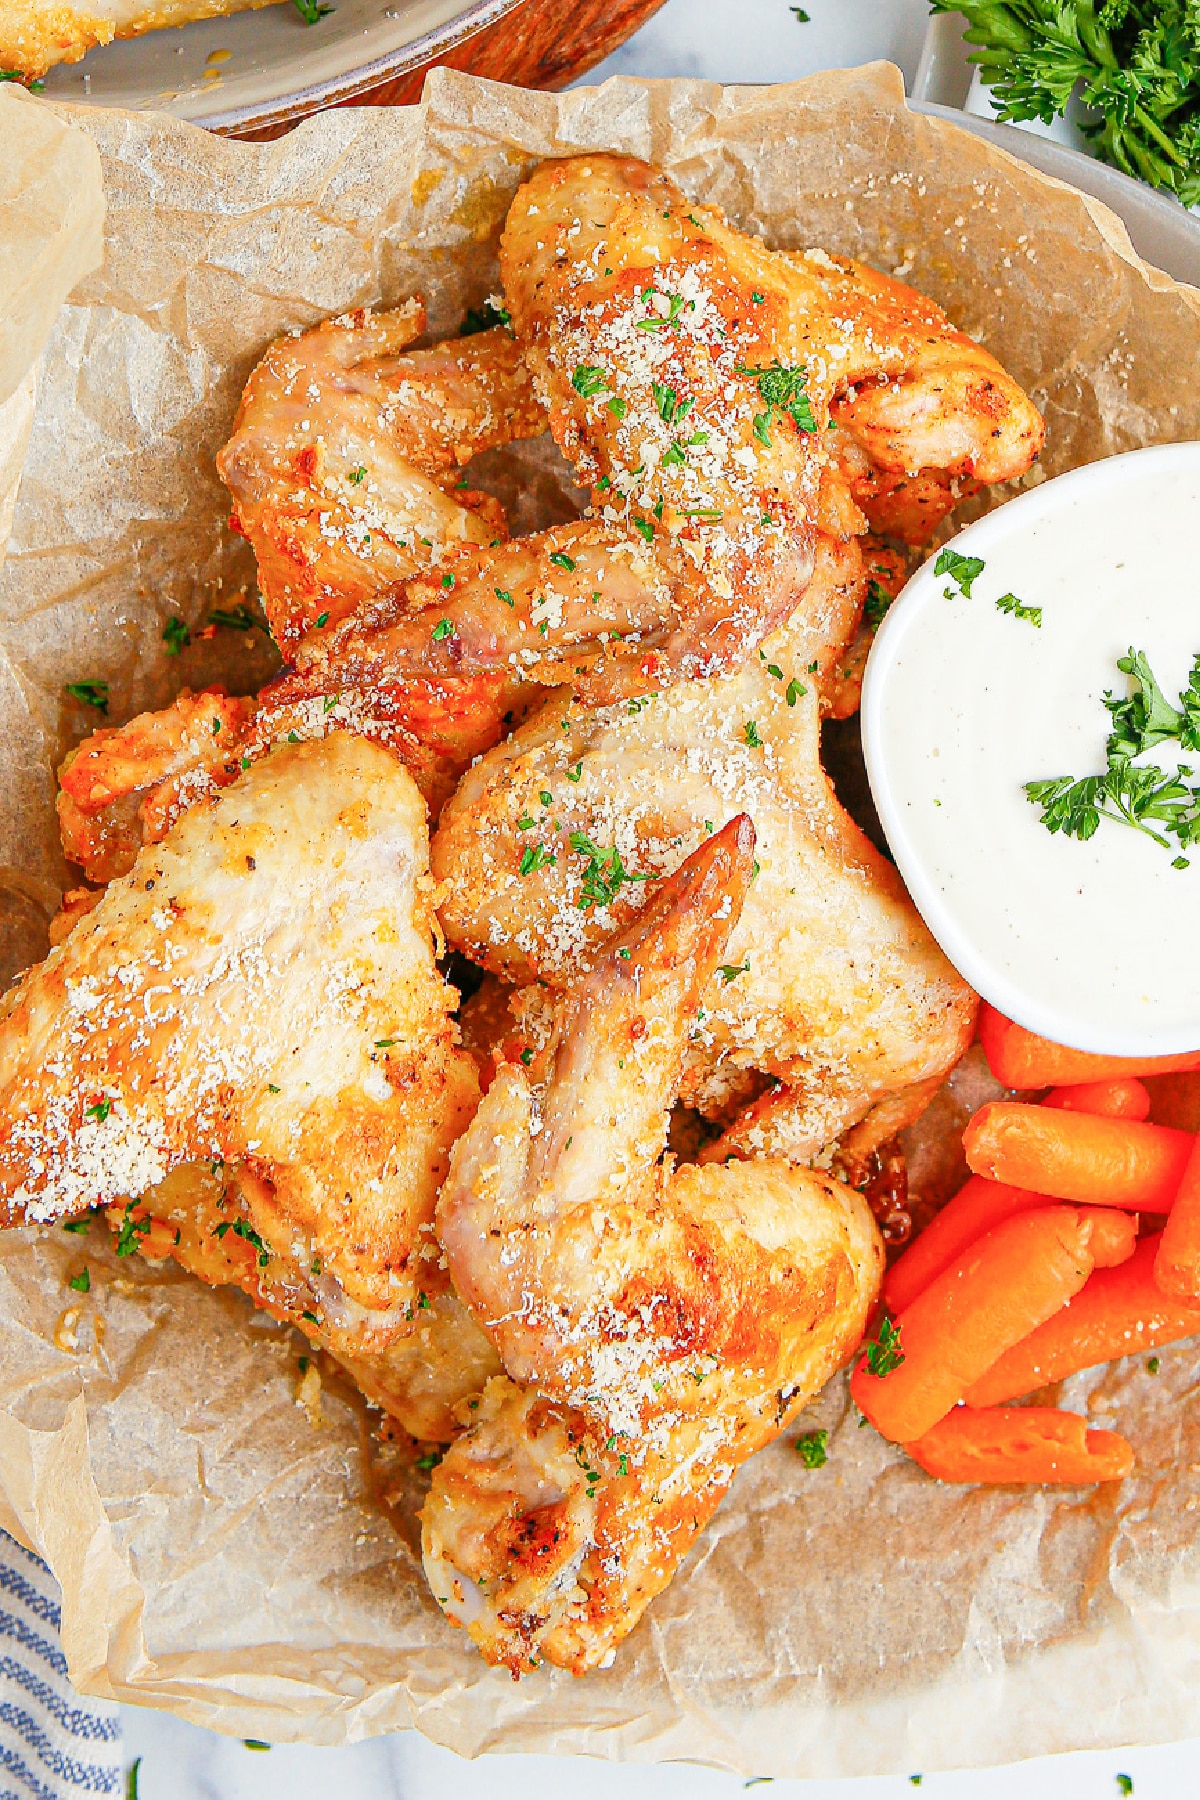 A platter of chicken wings and carrots with a side of dipping sauce.